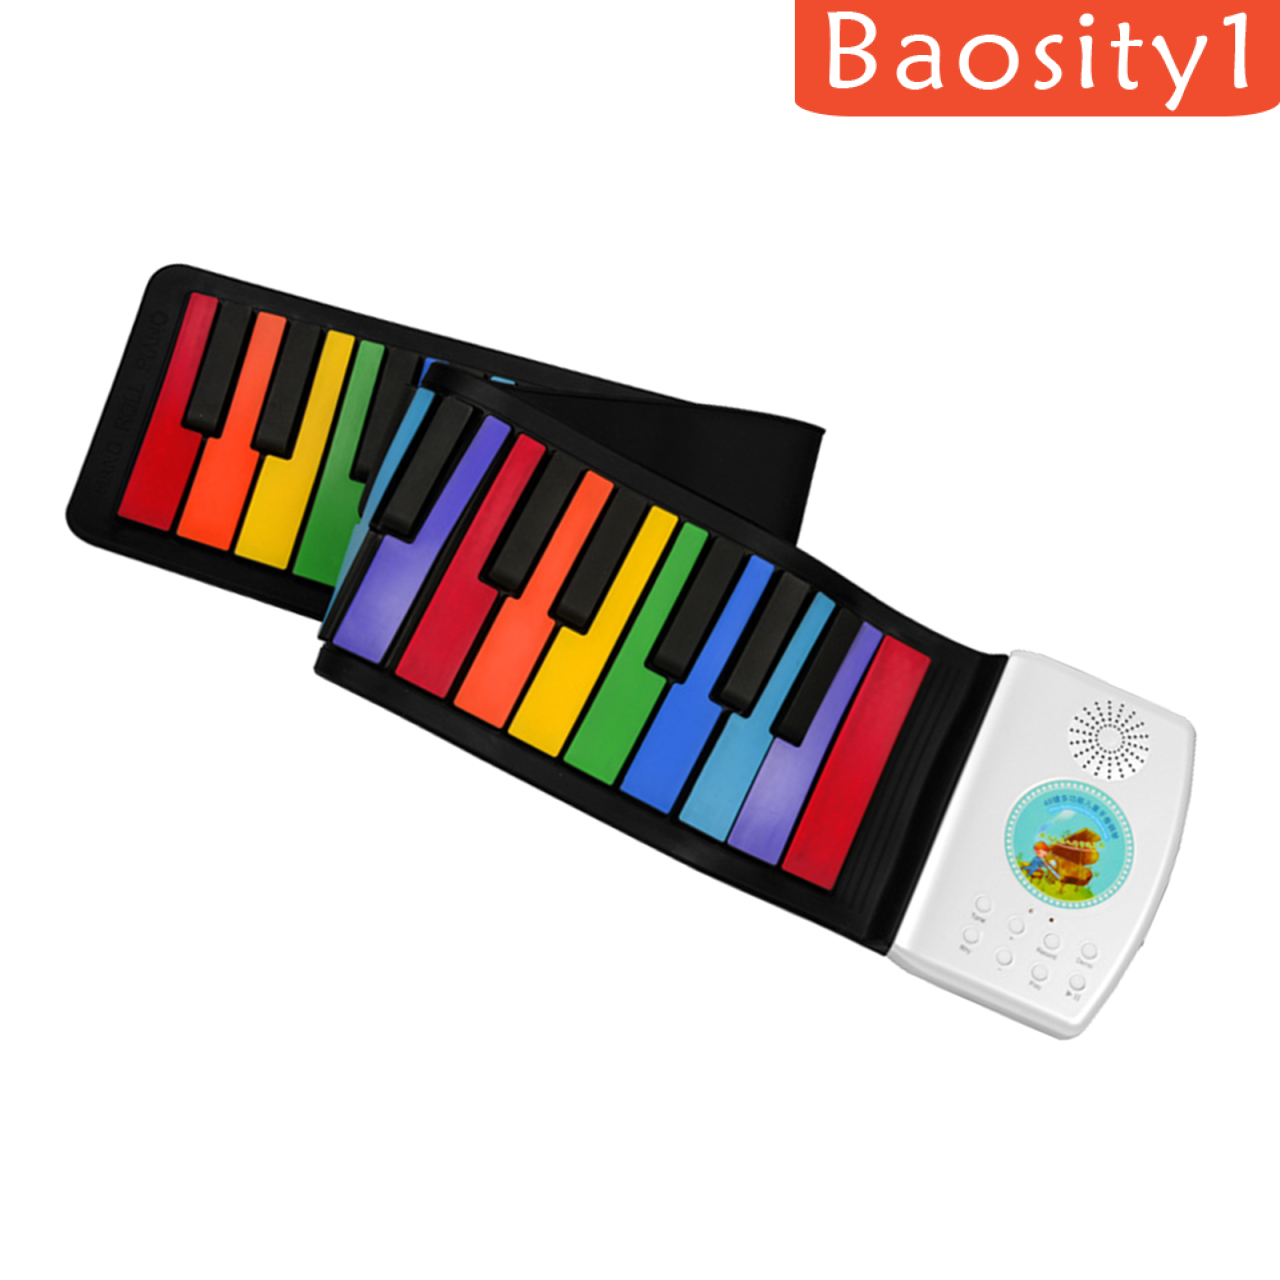 [BAOSITY1]Roll Up Piano Electric Digital Roll Up Keyboard Piano Gifts